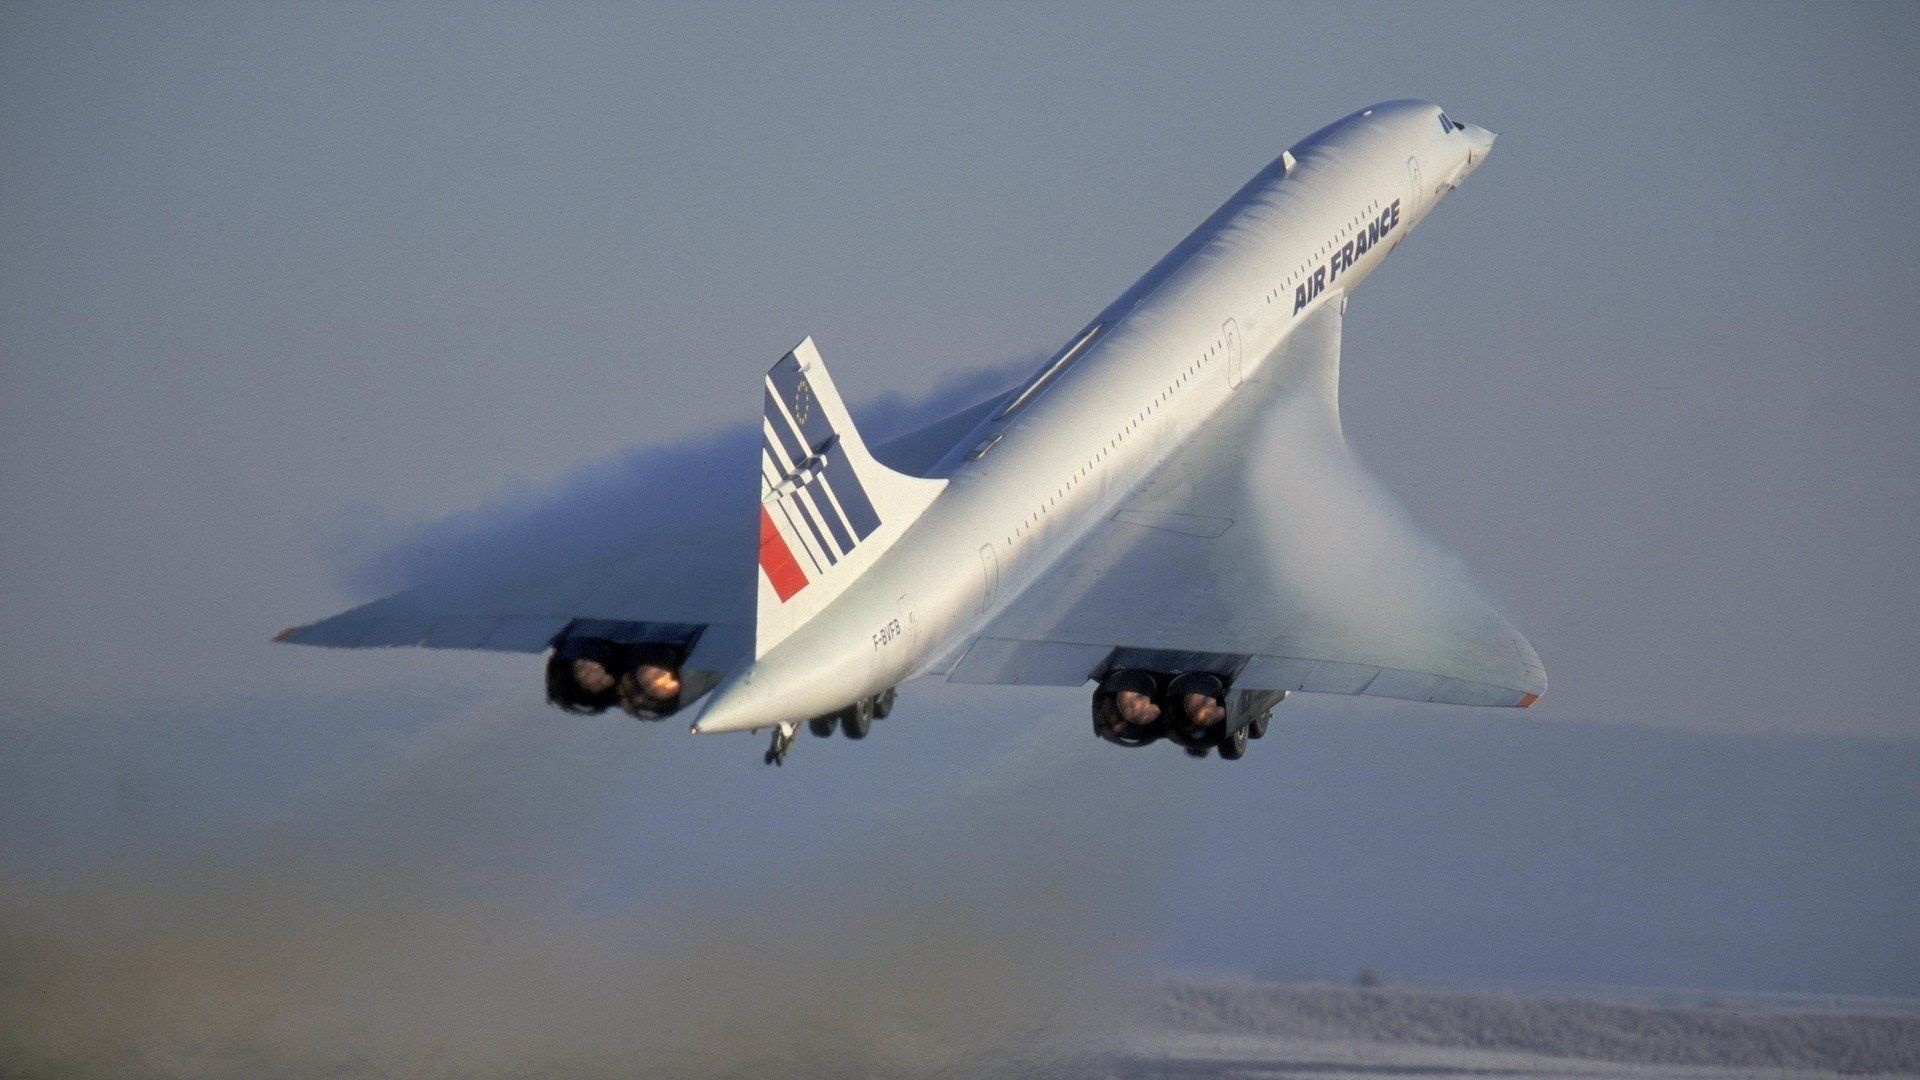 Concorde Airplane Wallpapers - Top Free Concorde Airplane Backgrounds 1920x1080